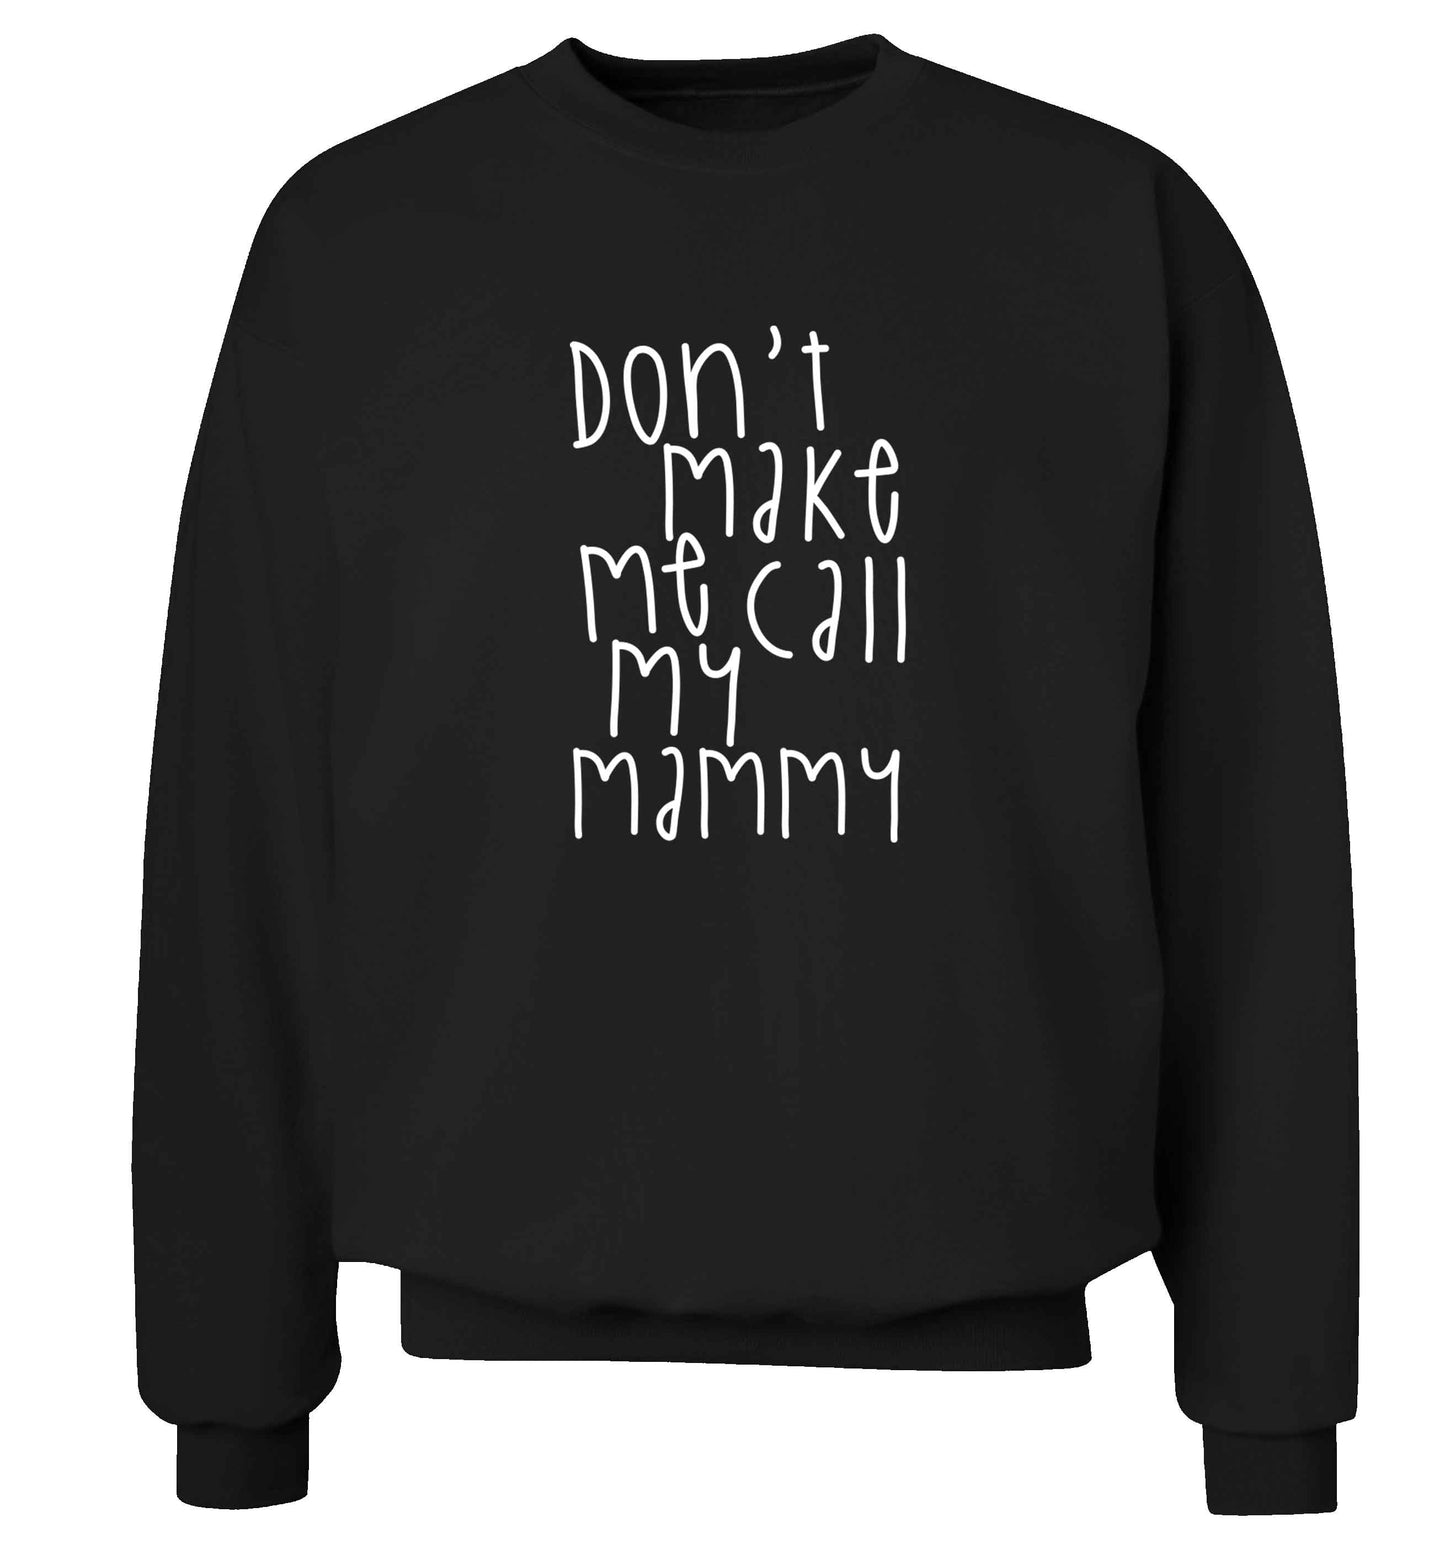 Don't make me call my mammy adult's unisex black sweater 2XL